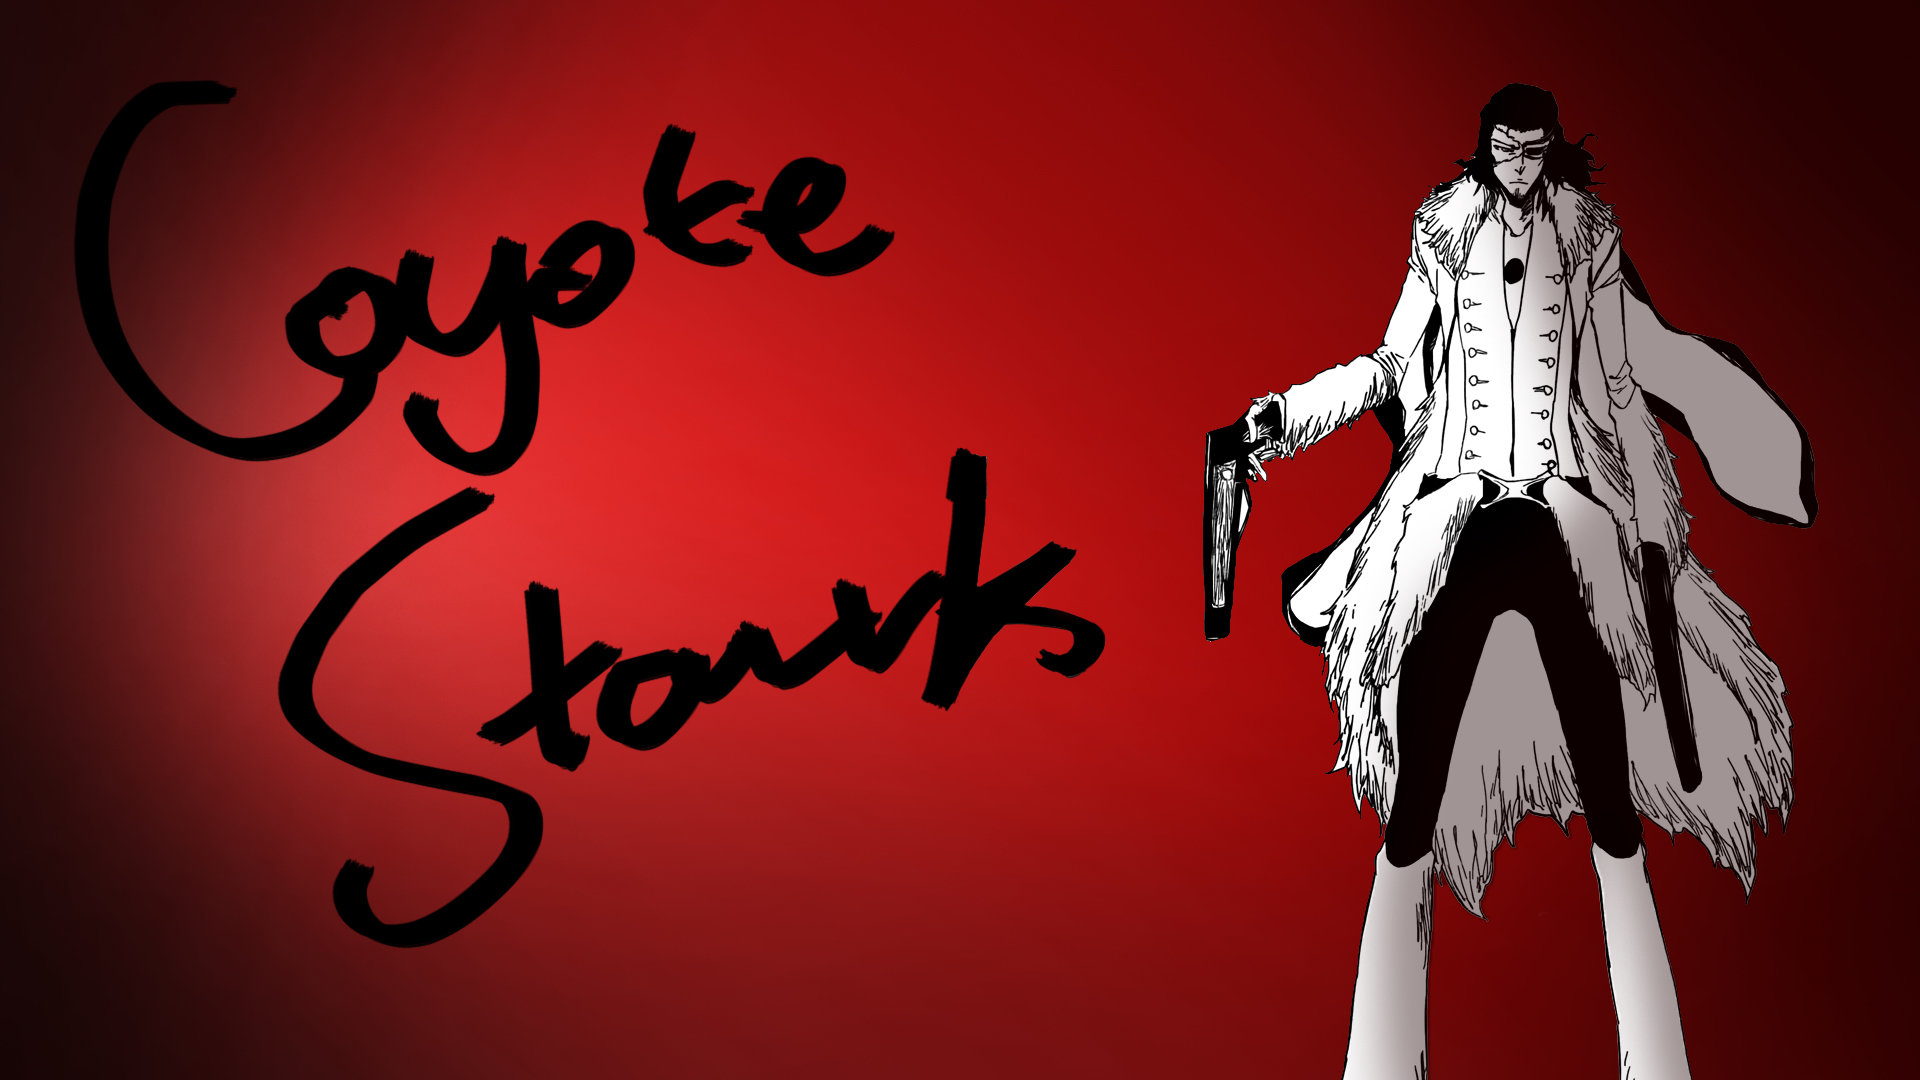 Awesome Coyote Starrk free wallpaper ID:417034 for hd 1920x1080 desktop